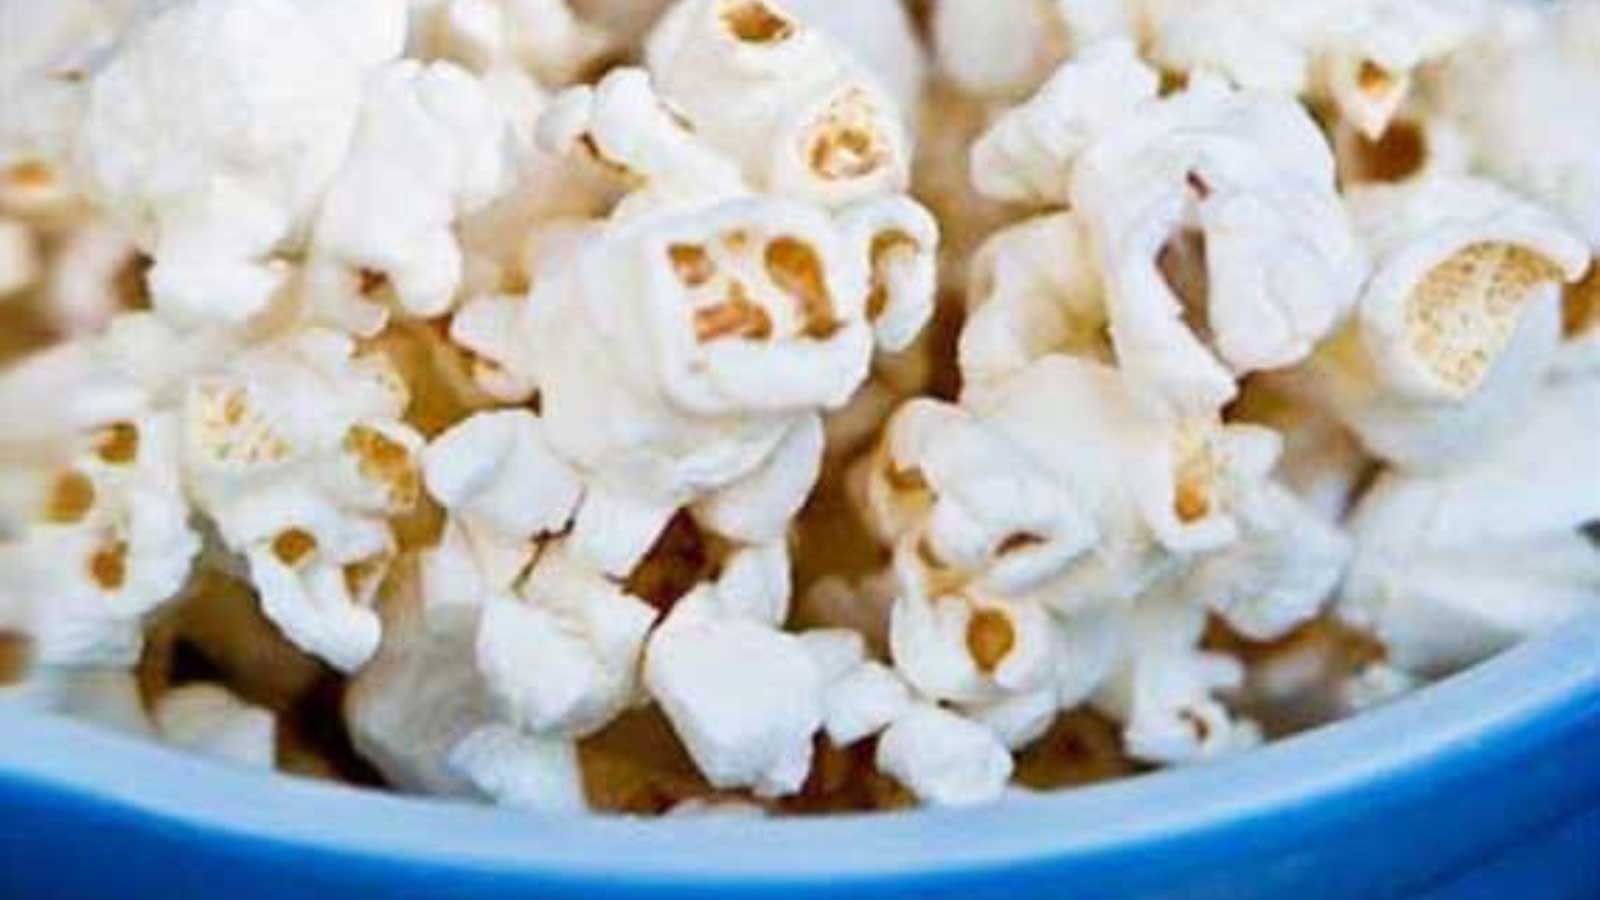 <p>Popcorn is amazing all by itself, but when you start experimenting with toppings….Wowza!  Give this <a href="https://www.thegraciouspantry.com/clean-eating-garlic-parmesan-popcorn/">garlic parmesan popcorn</a> a try and see for yourself. It’s so much more than just popcorn, and it makes a delicious road trip snack.</p>